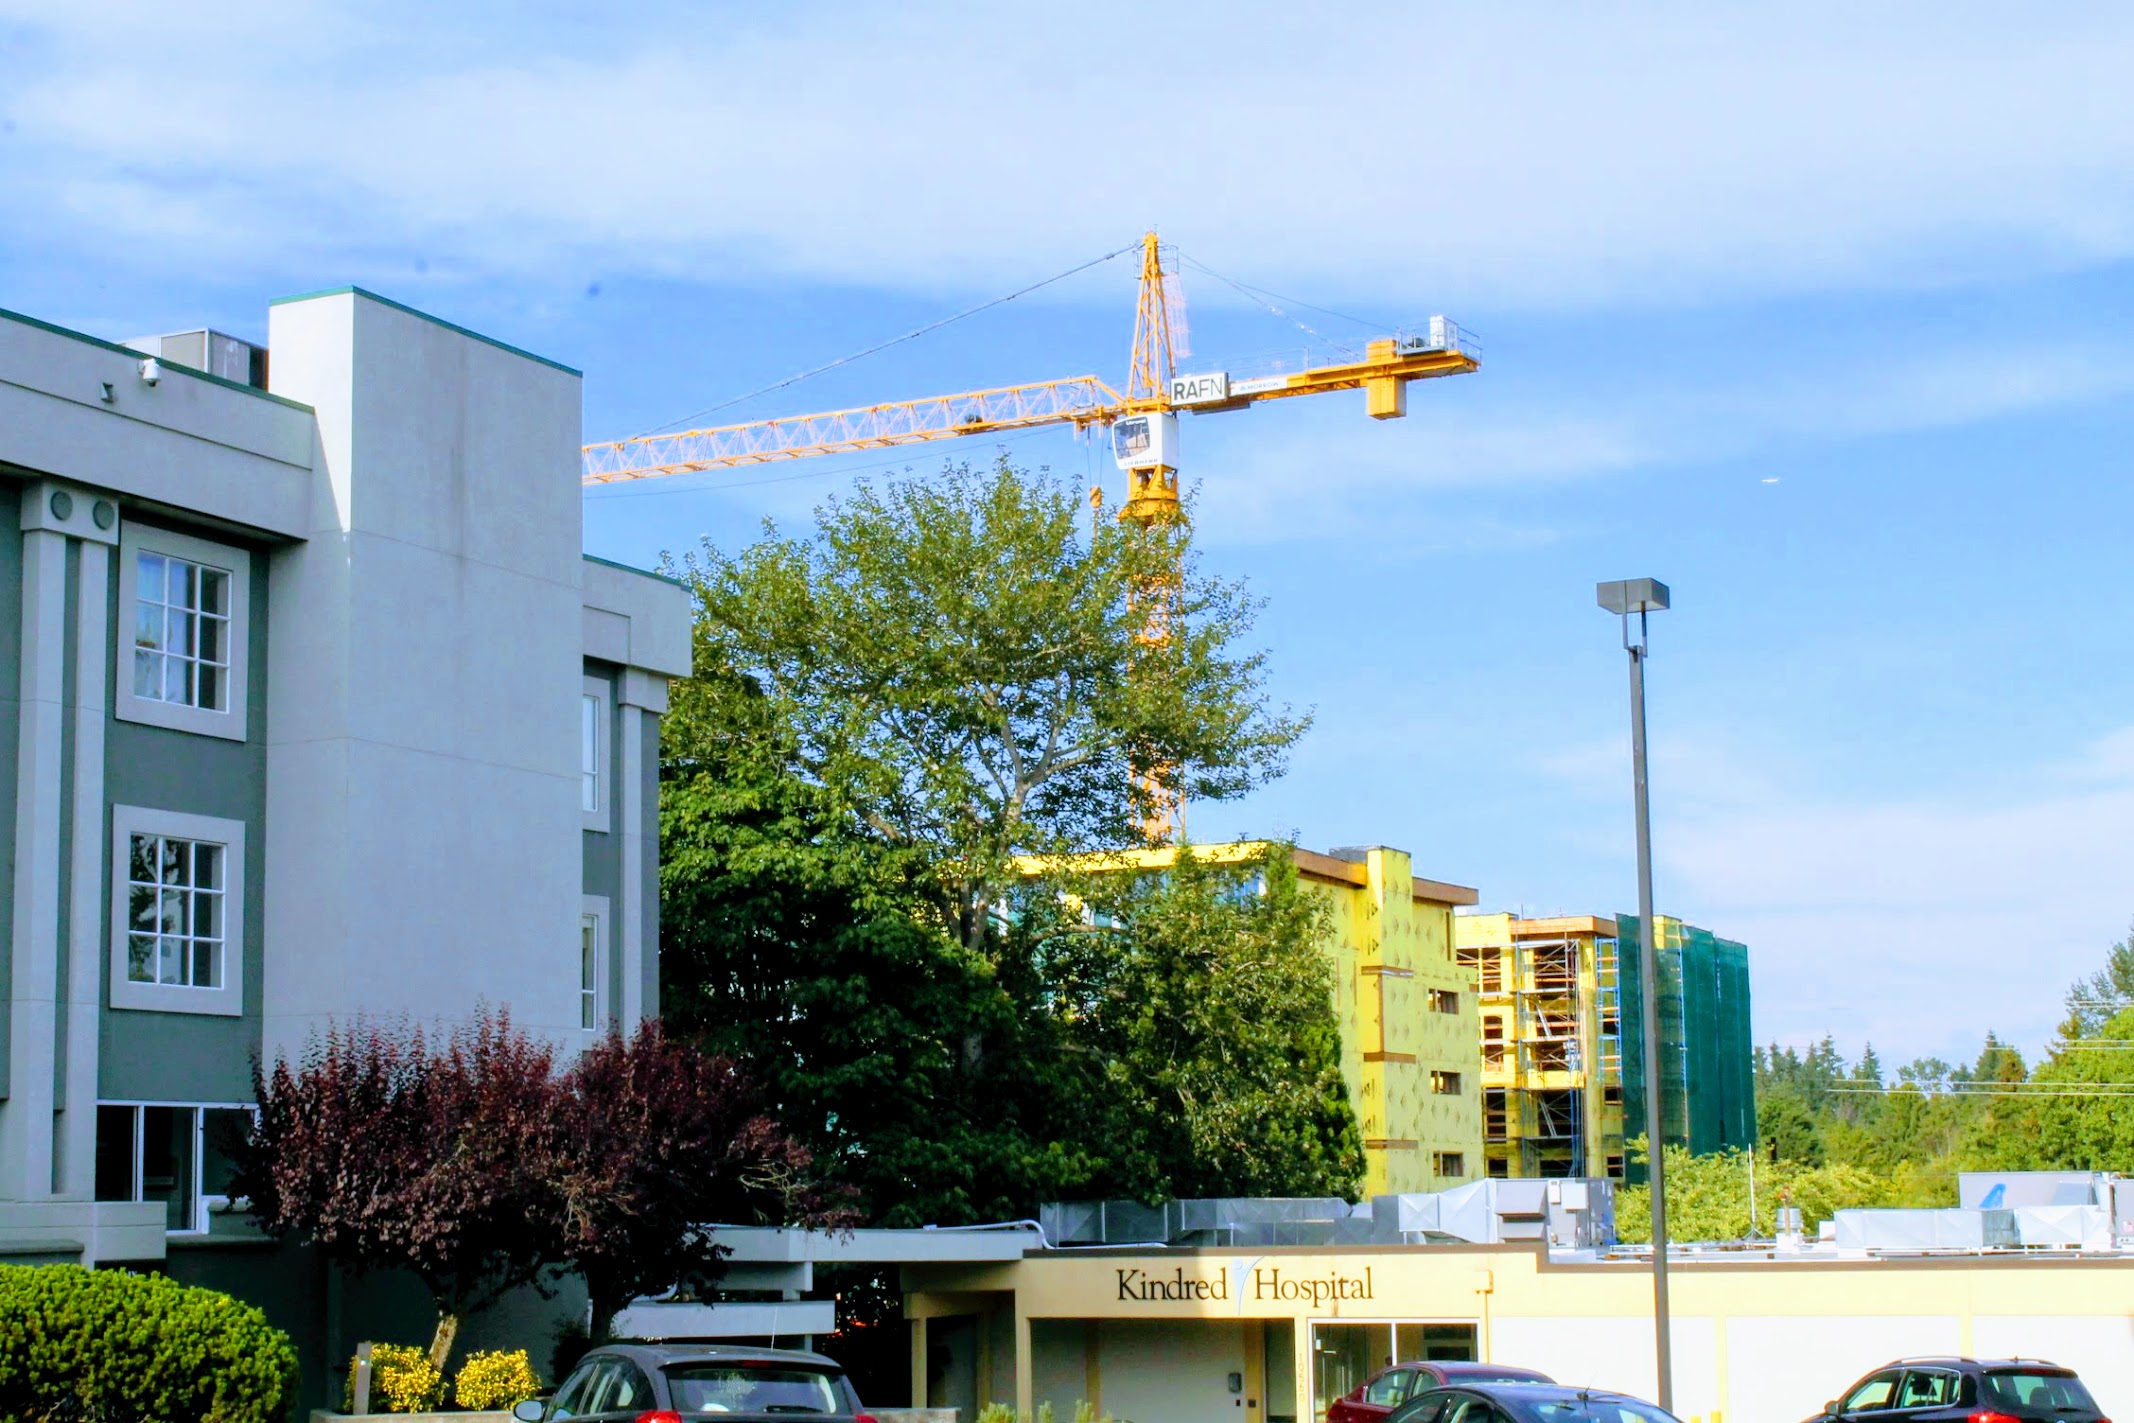 Construction Around the Building